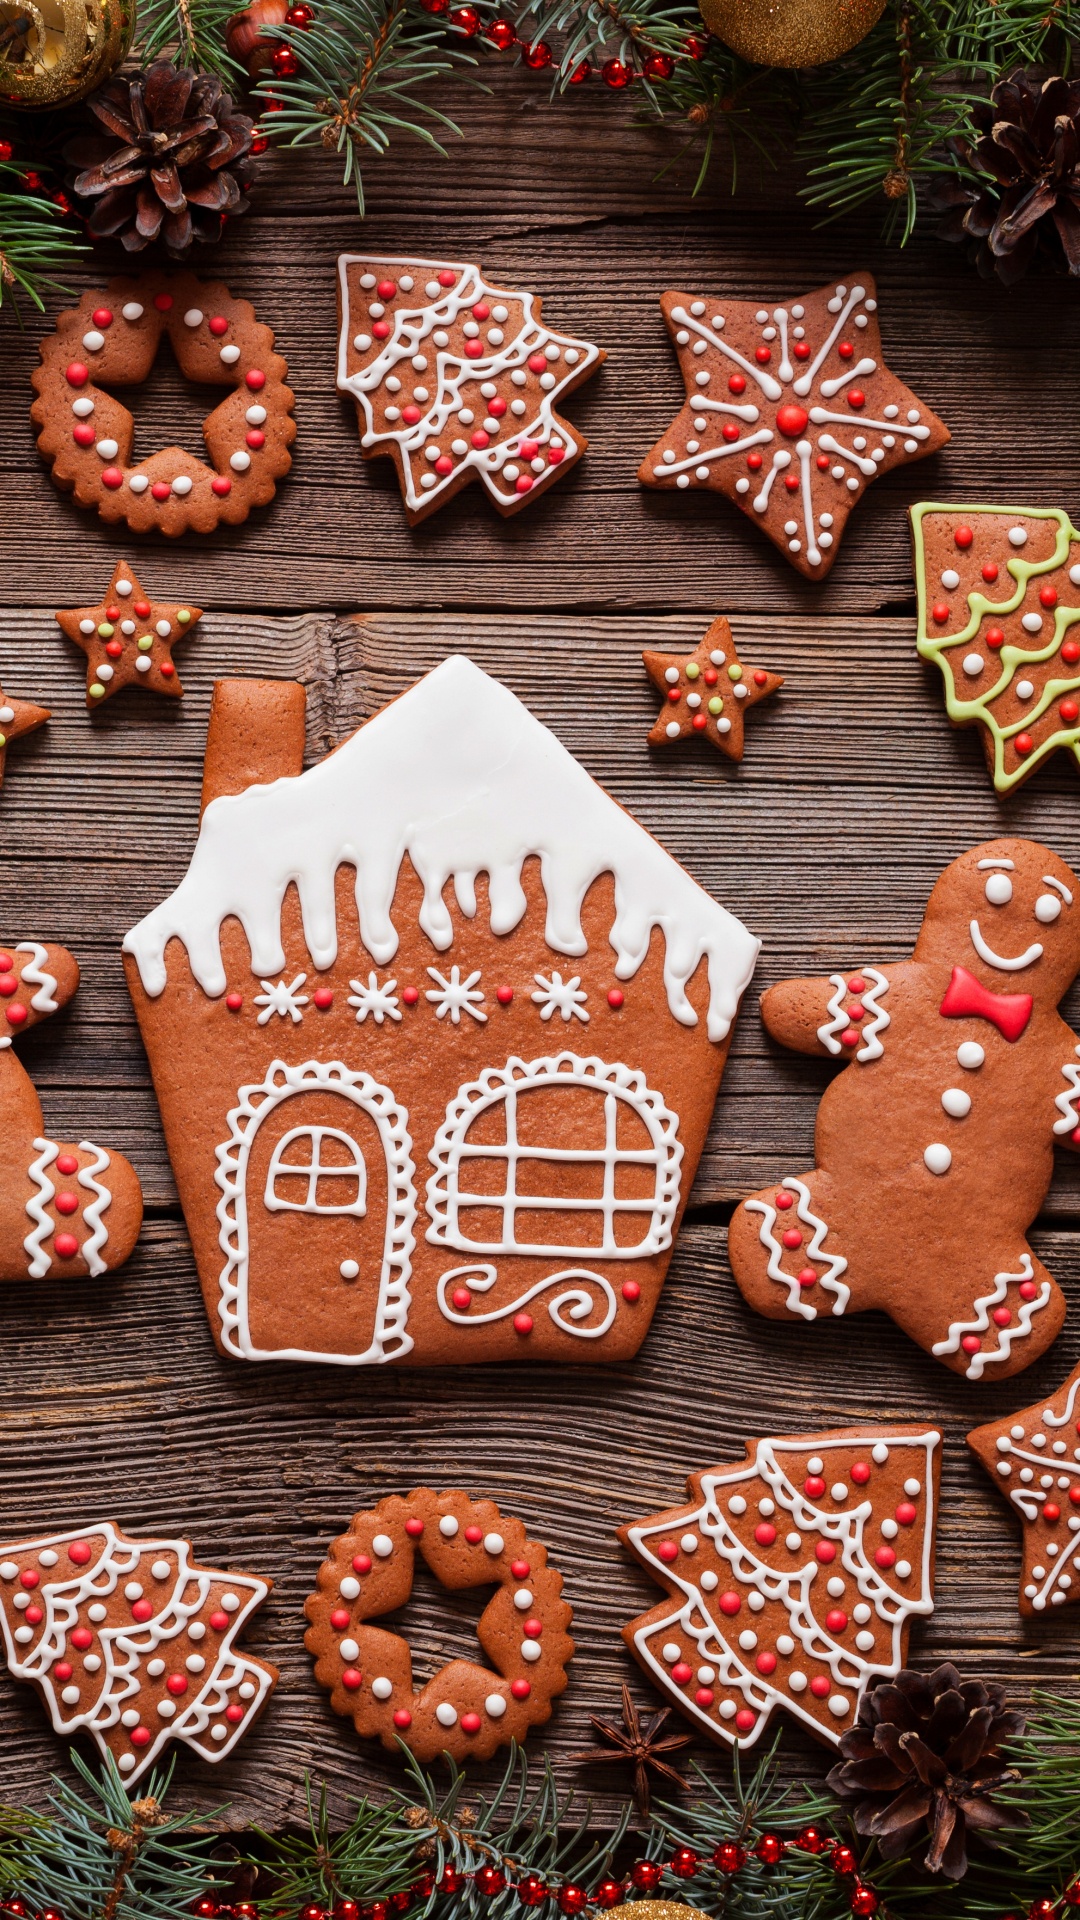 Gingerbread House, Christmas Day, Gingerbread Man, New Year, Christmas Tree. Wallpaper in 1080x1920 Resolution